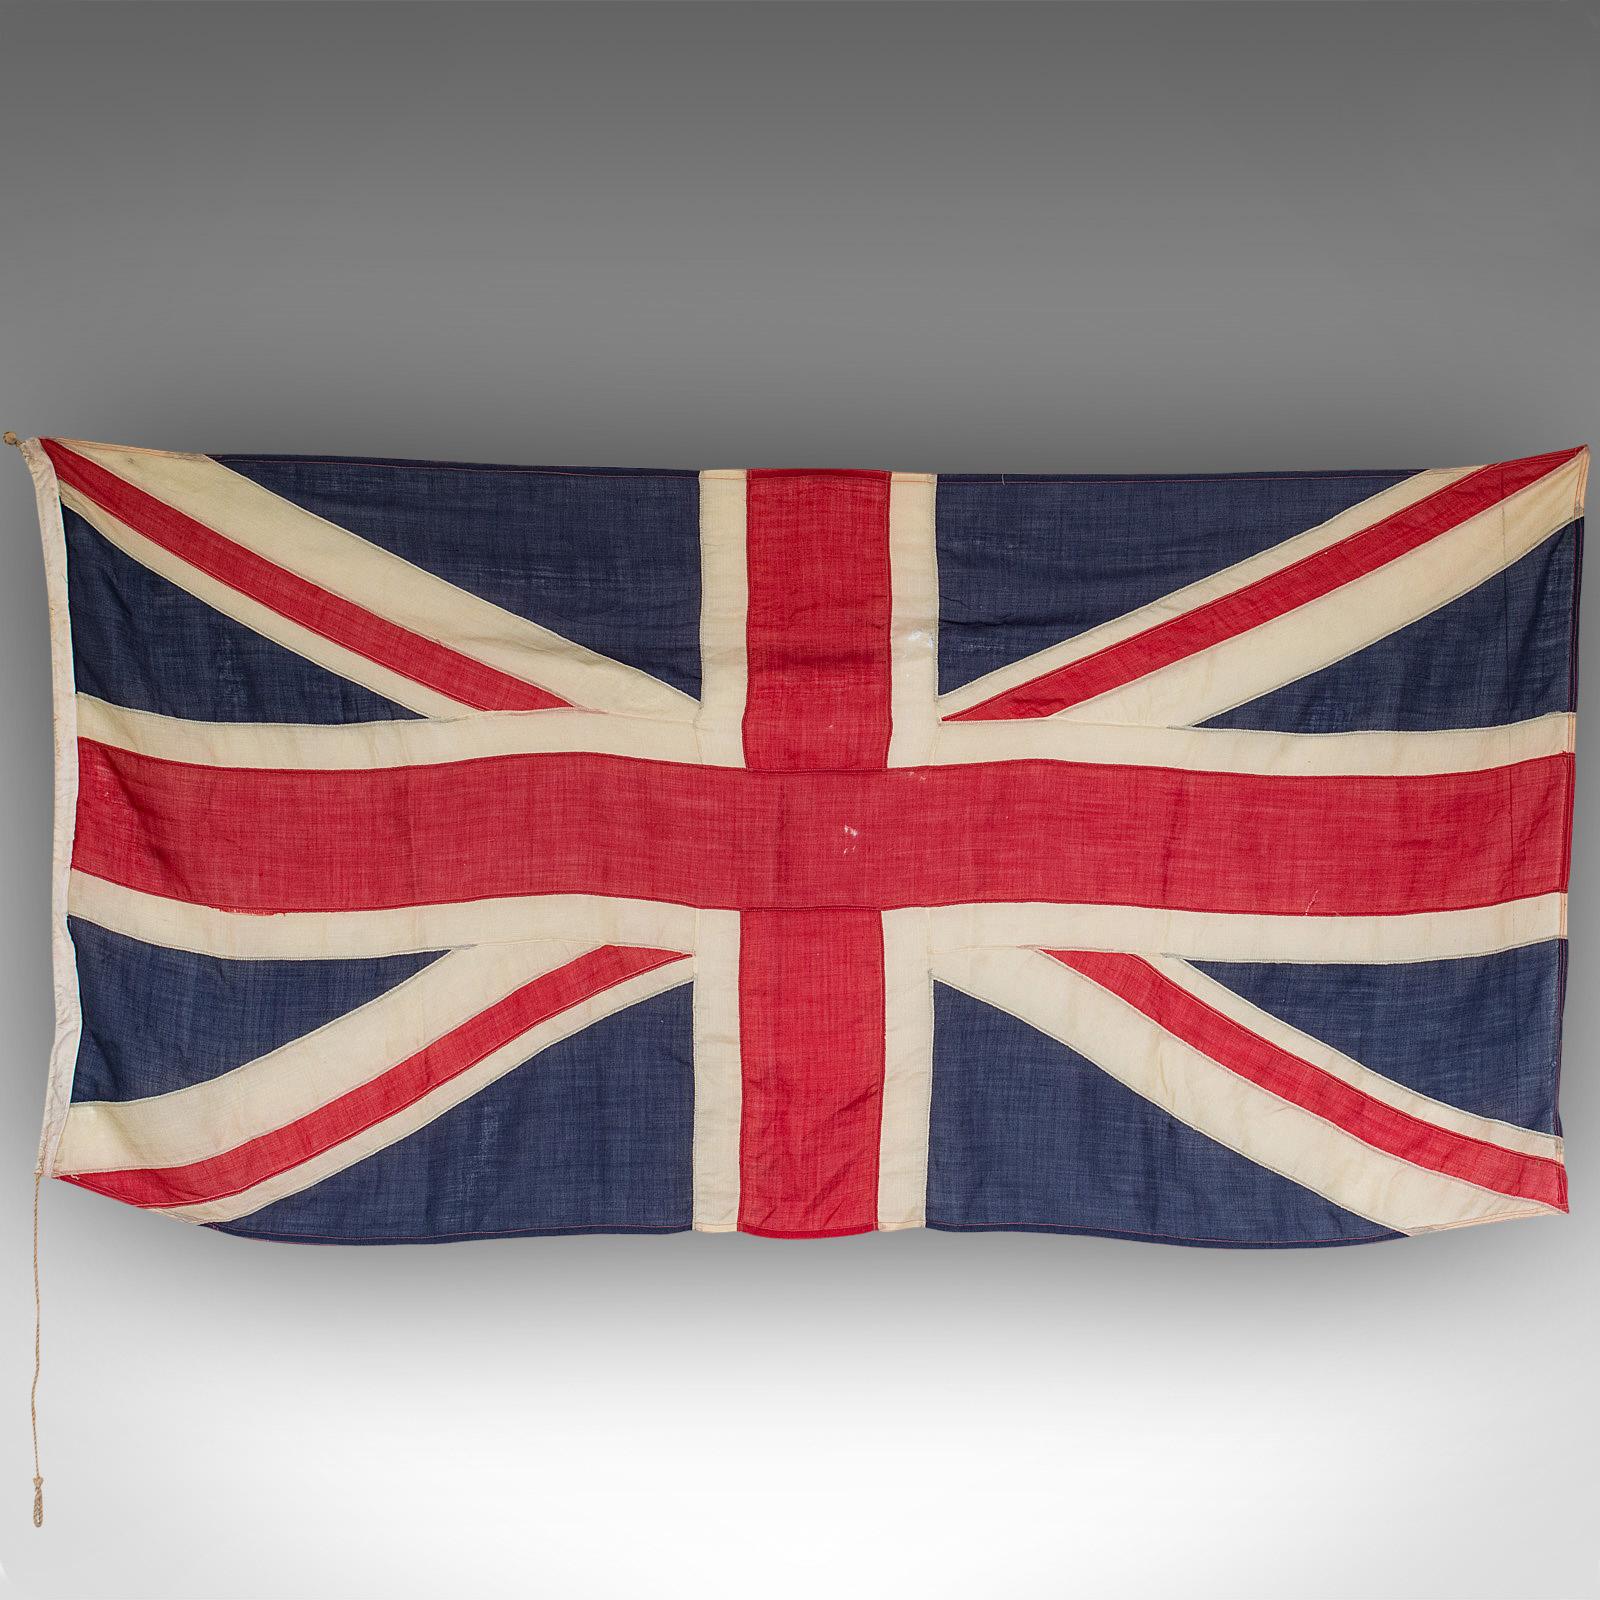 This is a large, vintage Union Jack. An English, cotton flag of the United Kingdom of Great Britain, dating to the mid-20th century, circa 1945.

Ready to fly, vintage flag
Displays a desirable aged patina
Quality stitch seam flag with